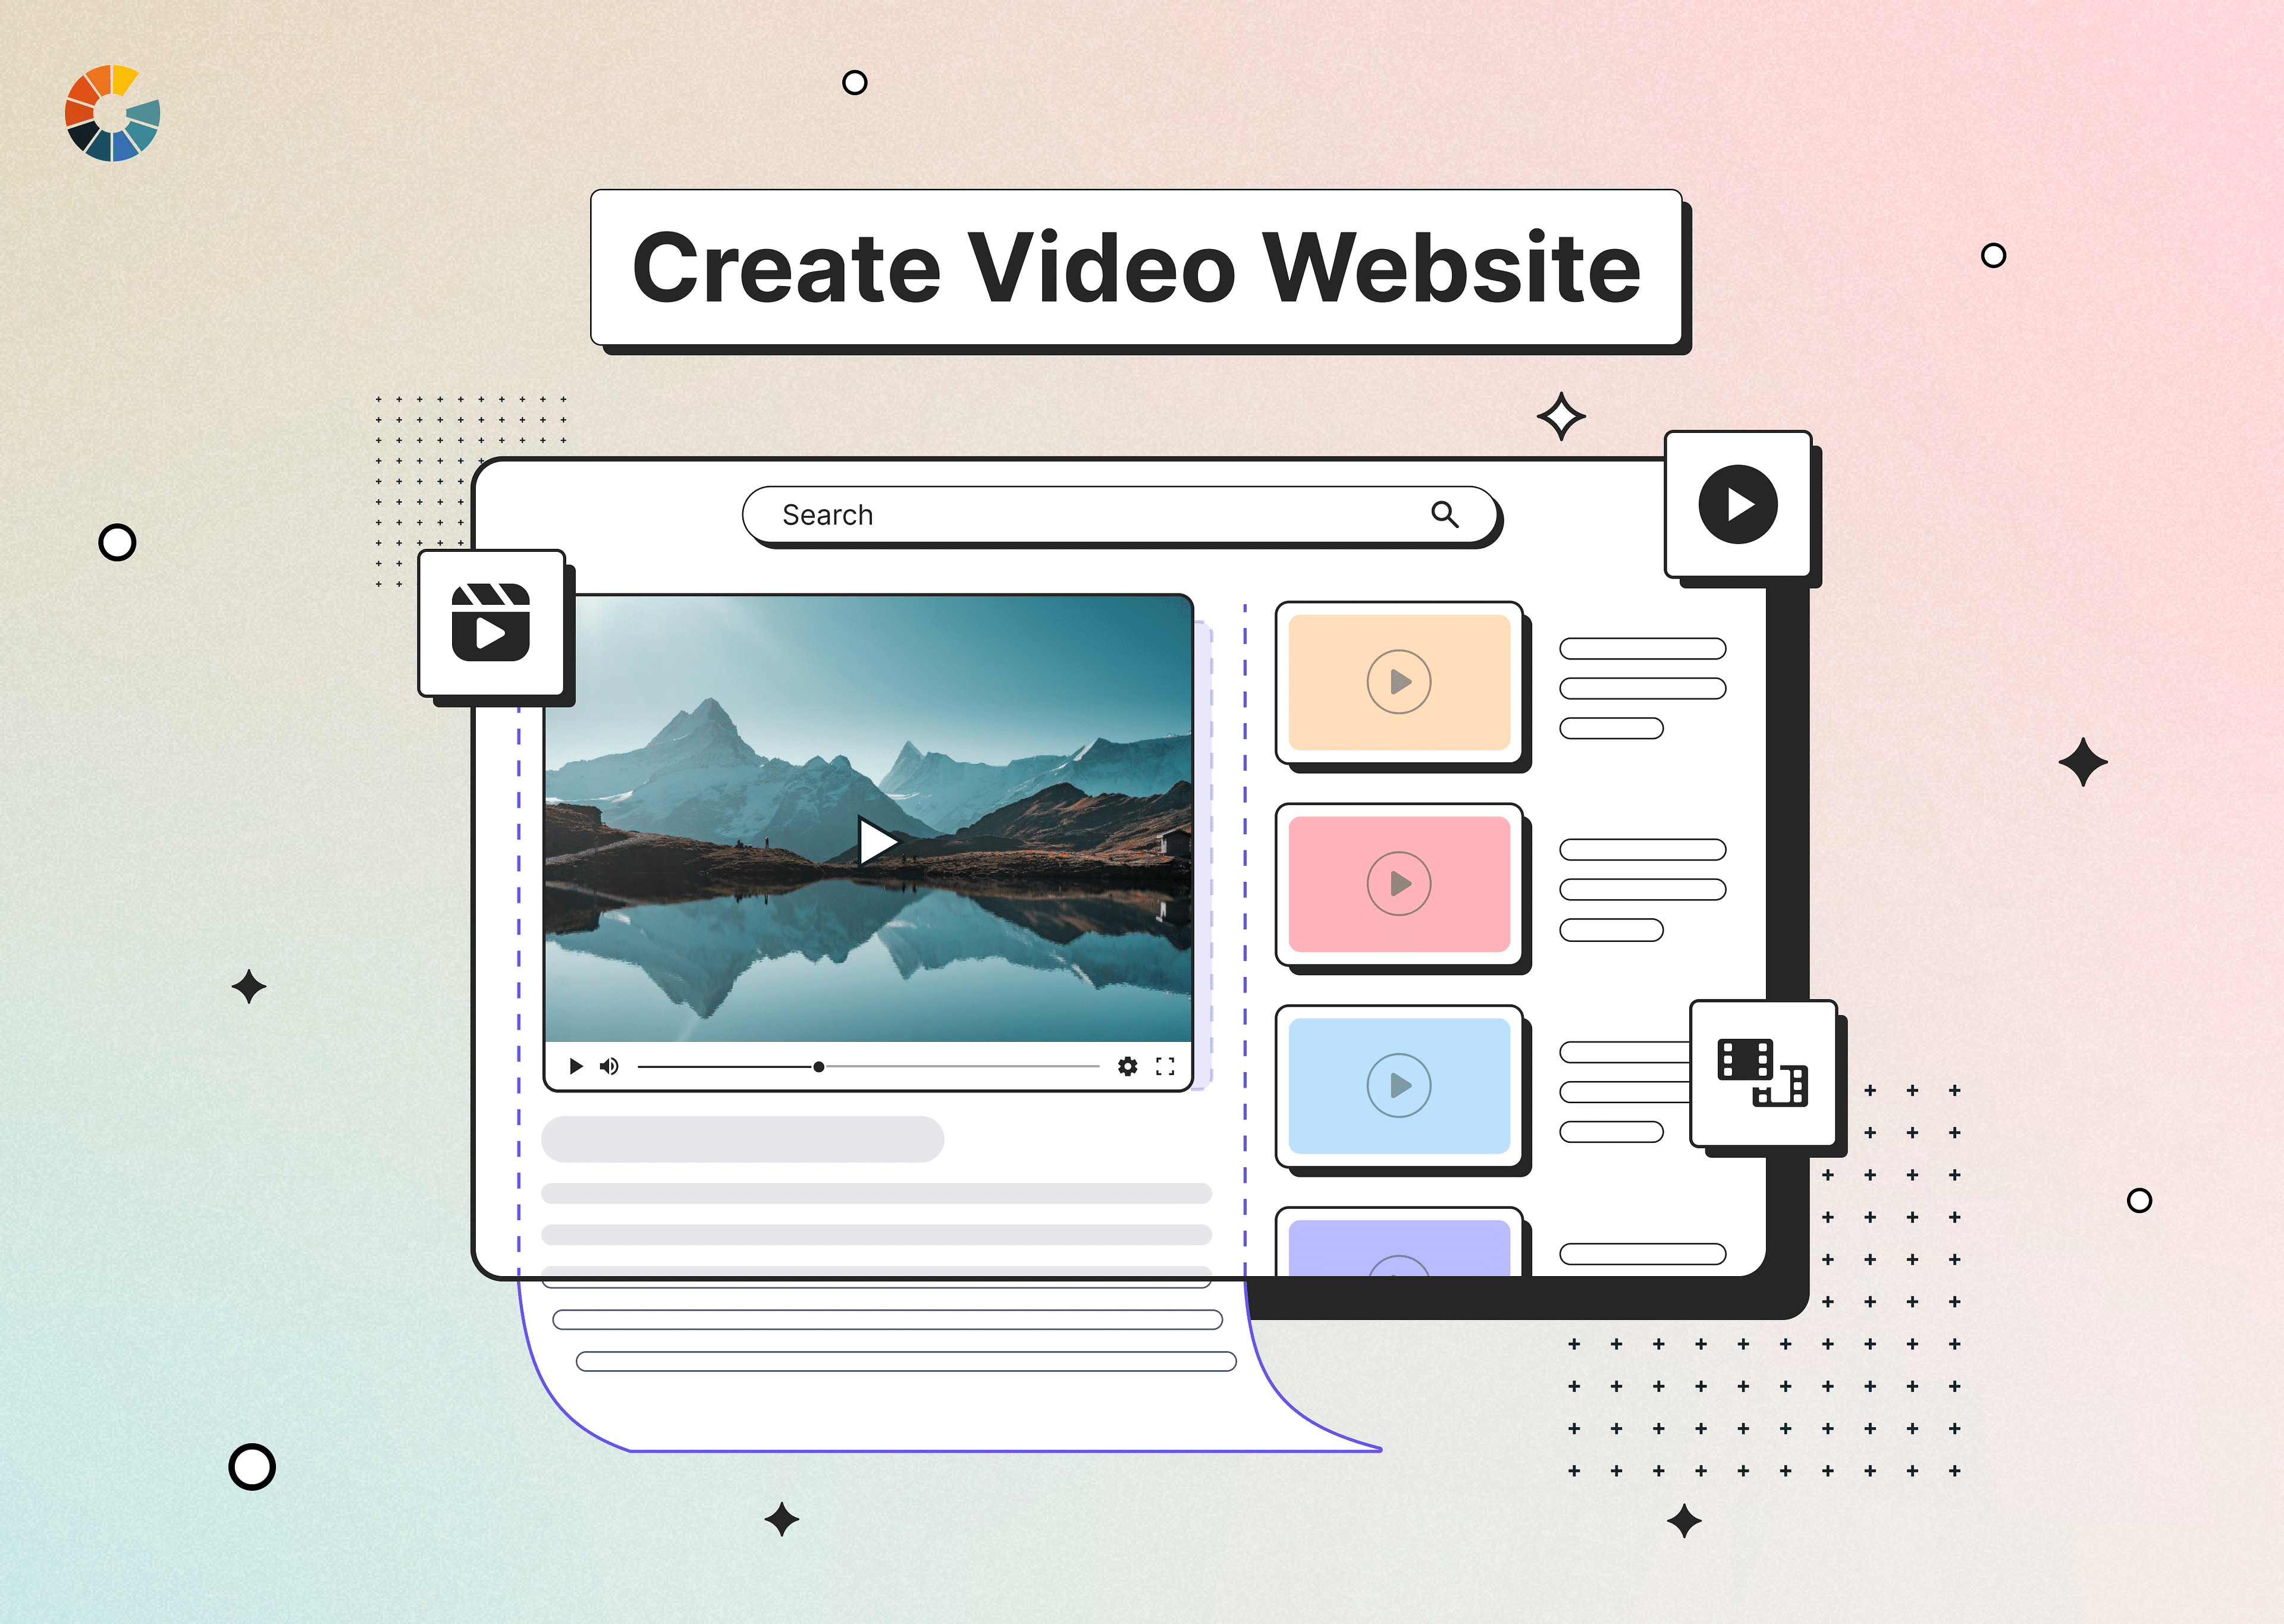 How to Create a Video Website that is Well-Optimized?